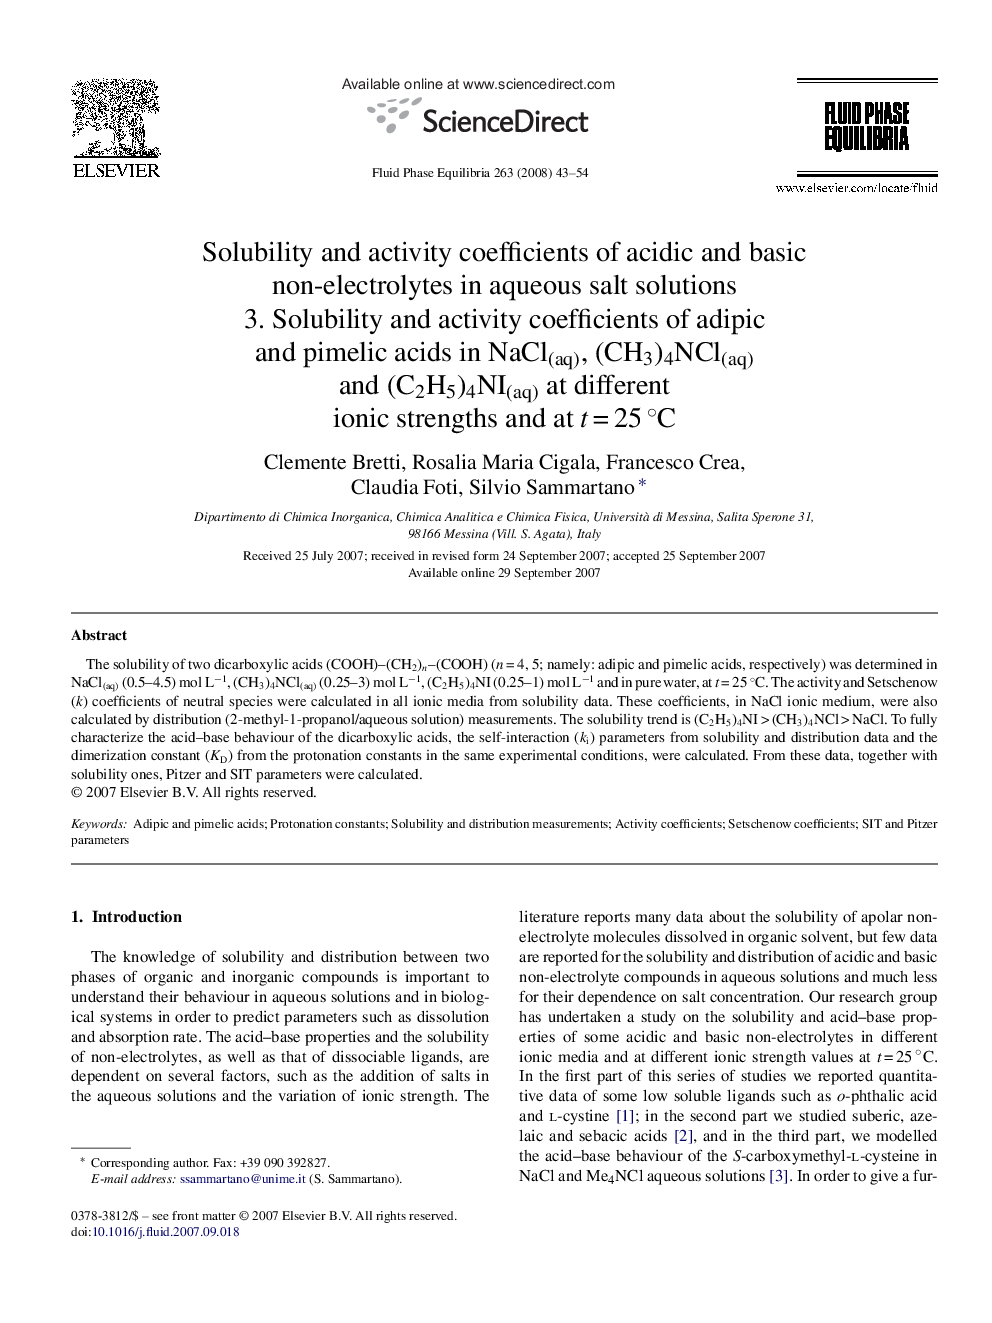 Solubility and activity coefficients of acidic and basic non-electrolytes in aqueous salt solutions: 3. Solubility and activity coefficients of adipic and pimelic acids in NaCl(aq), (CH3)4NCl(aq) and (C2H5)4NI(aq) at different ionic strengths and at t = 2